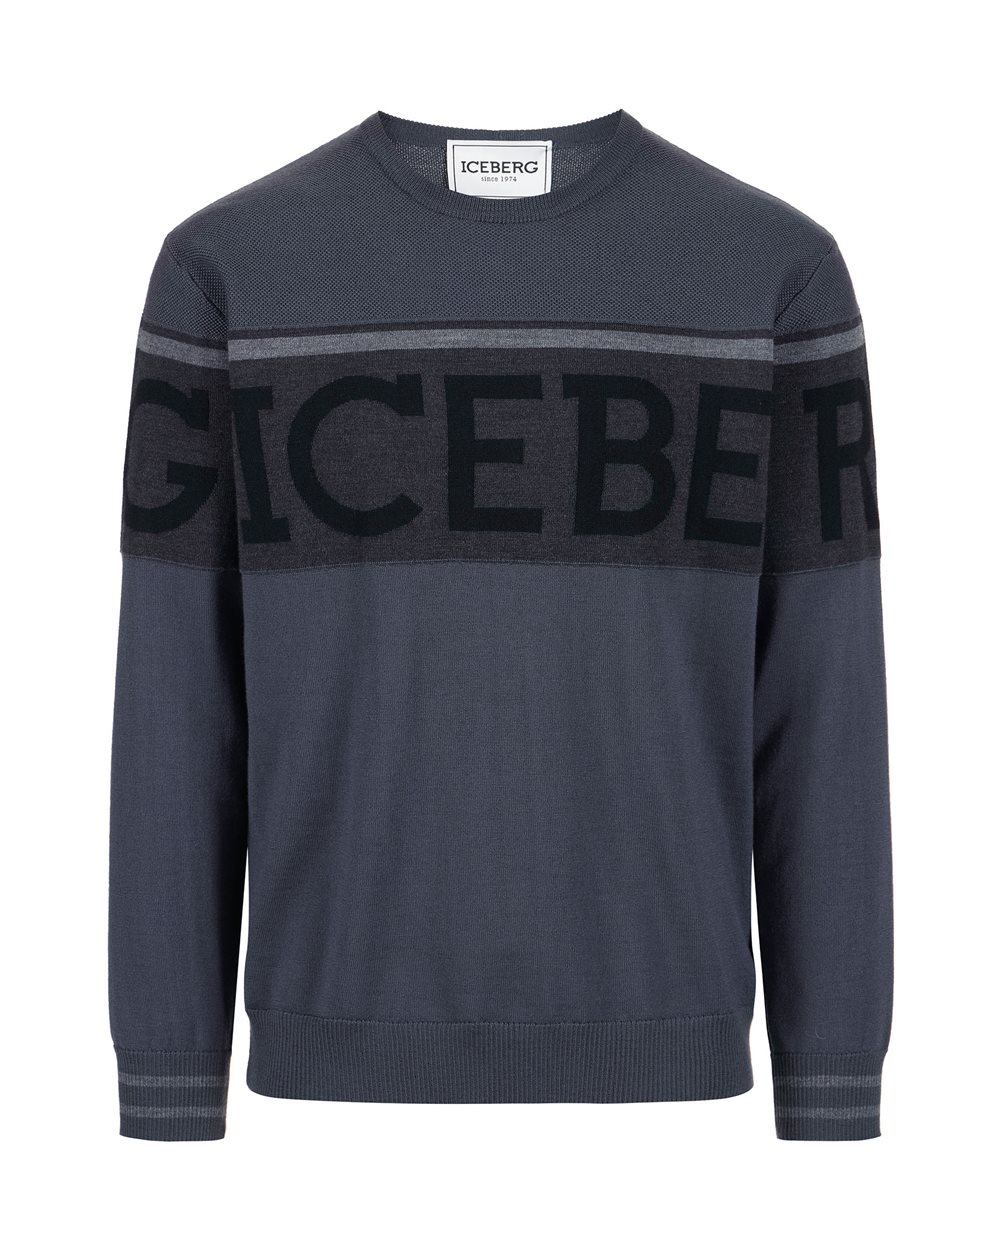 Wool sweater with logo - carosello preview uomo | Iceberg - Official Website